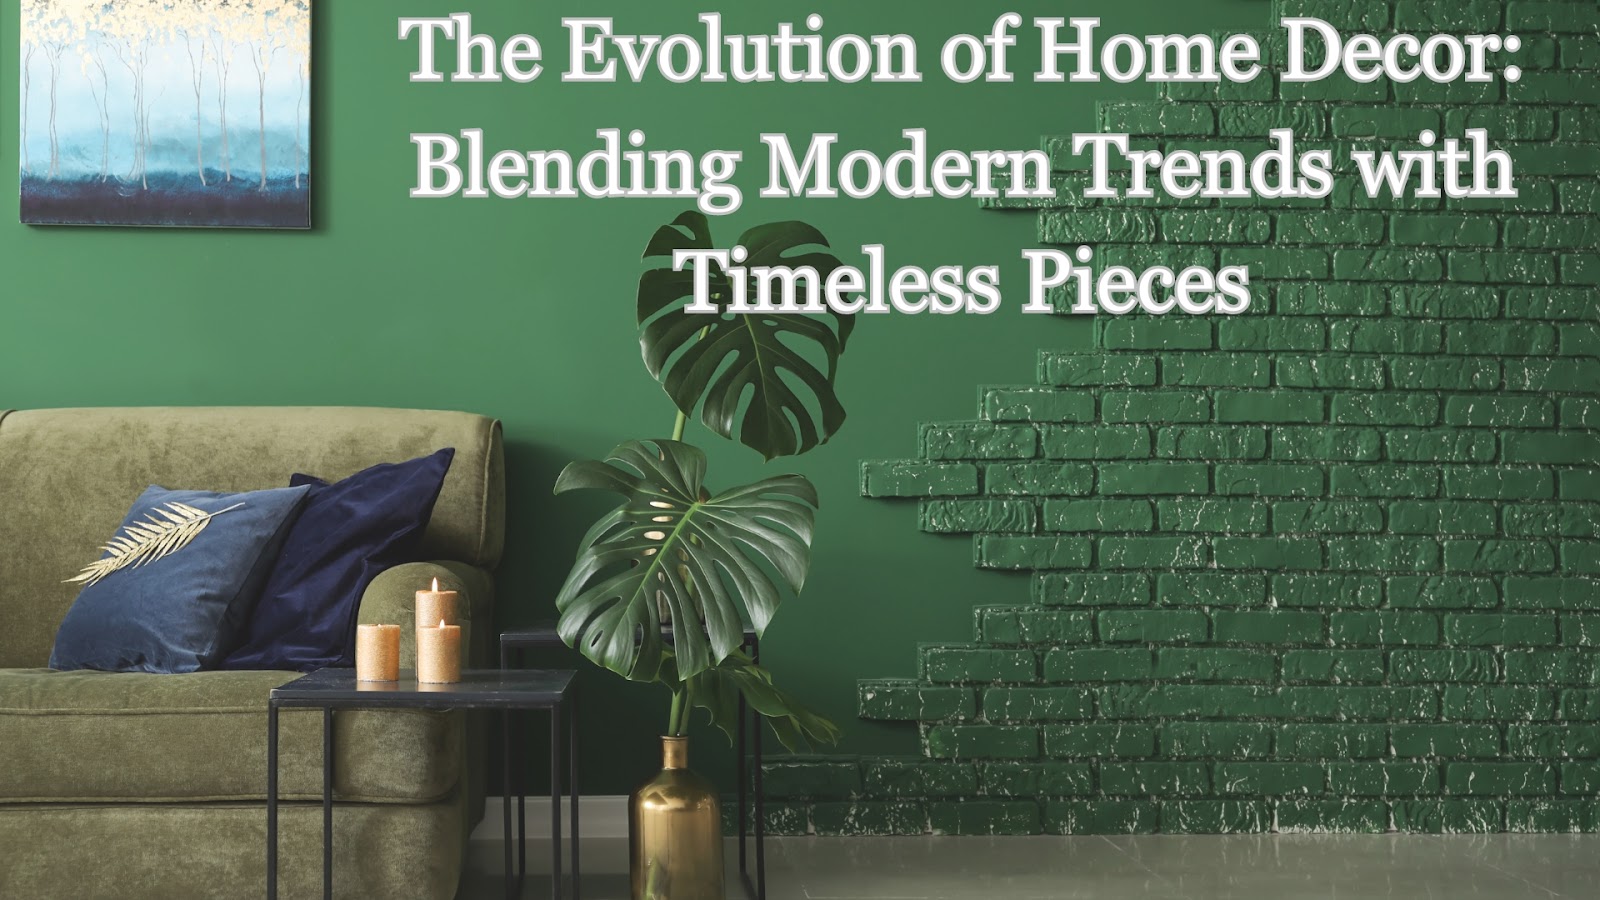 The Evolution of Home Decor: Blending Modern Trends with Timeless Pieces